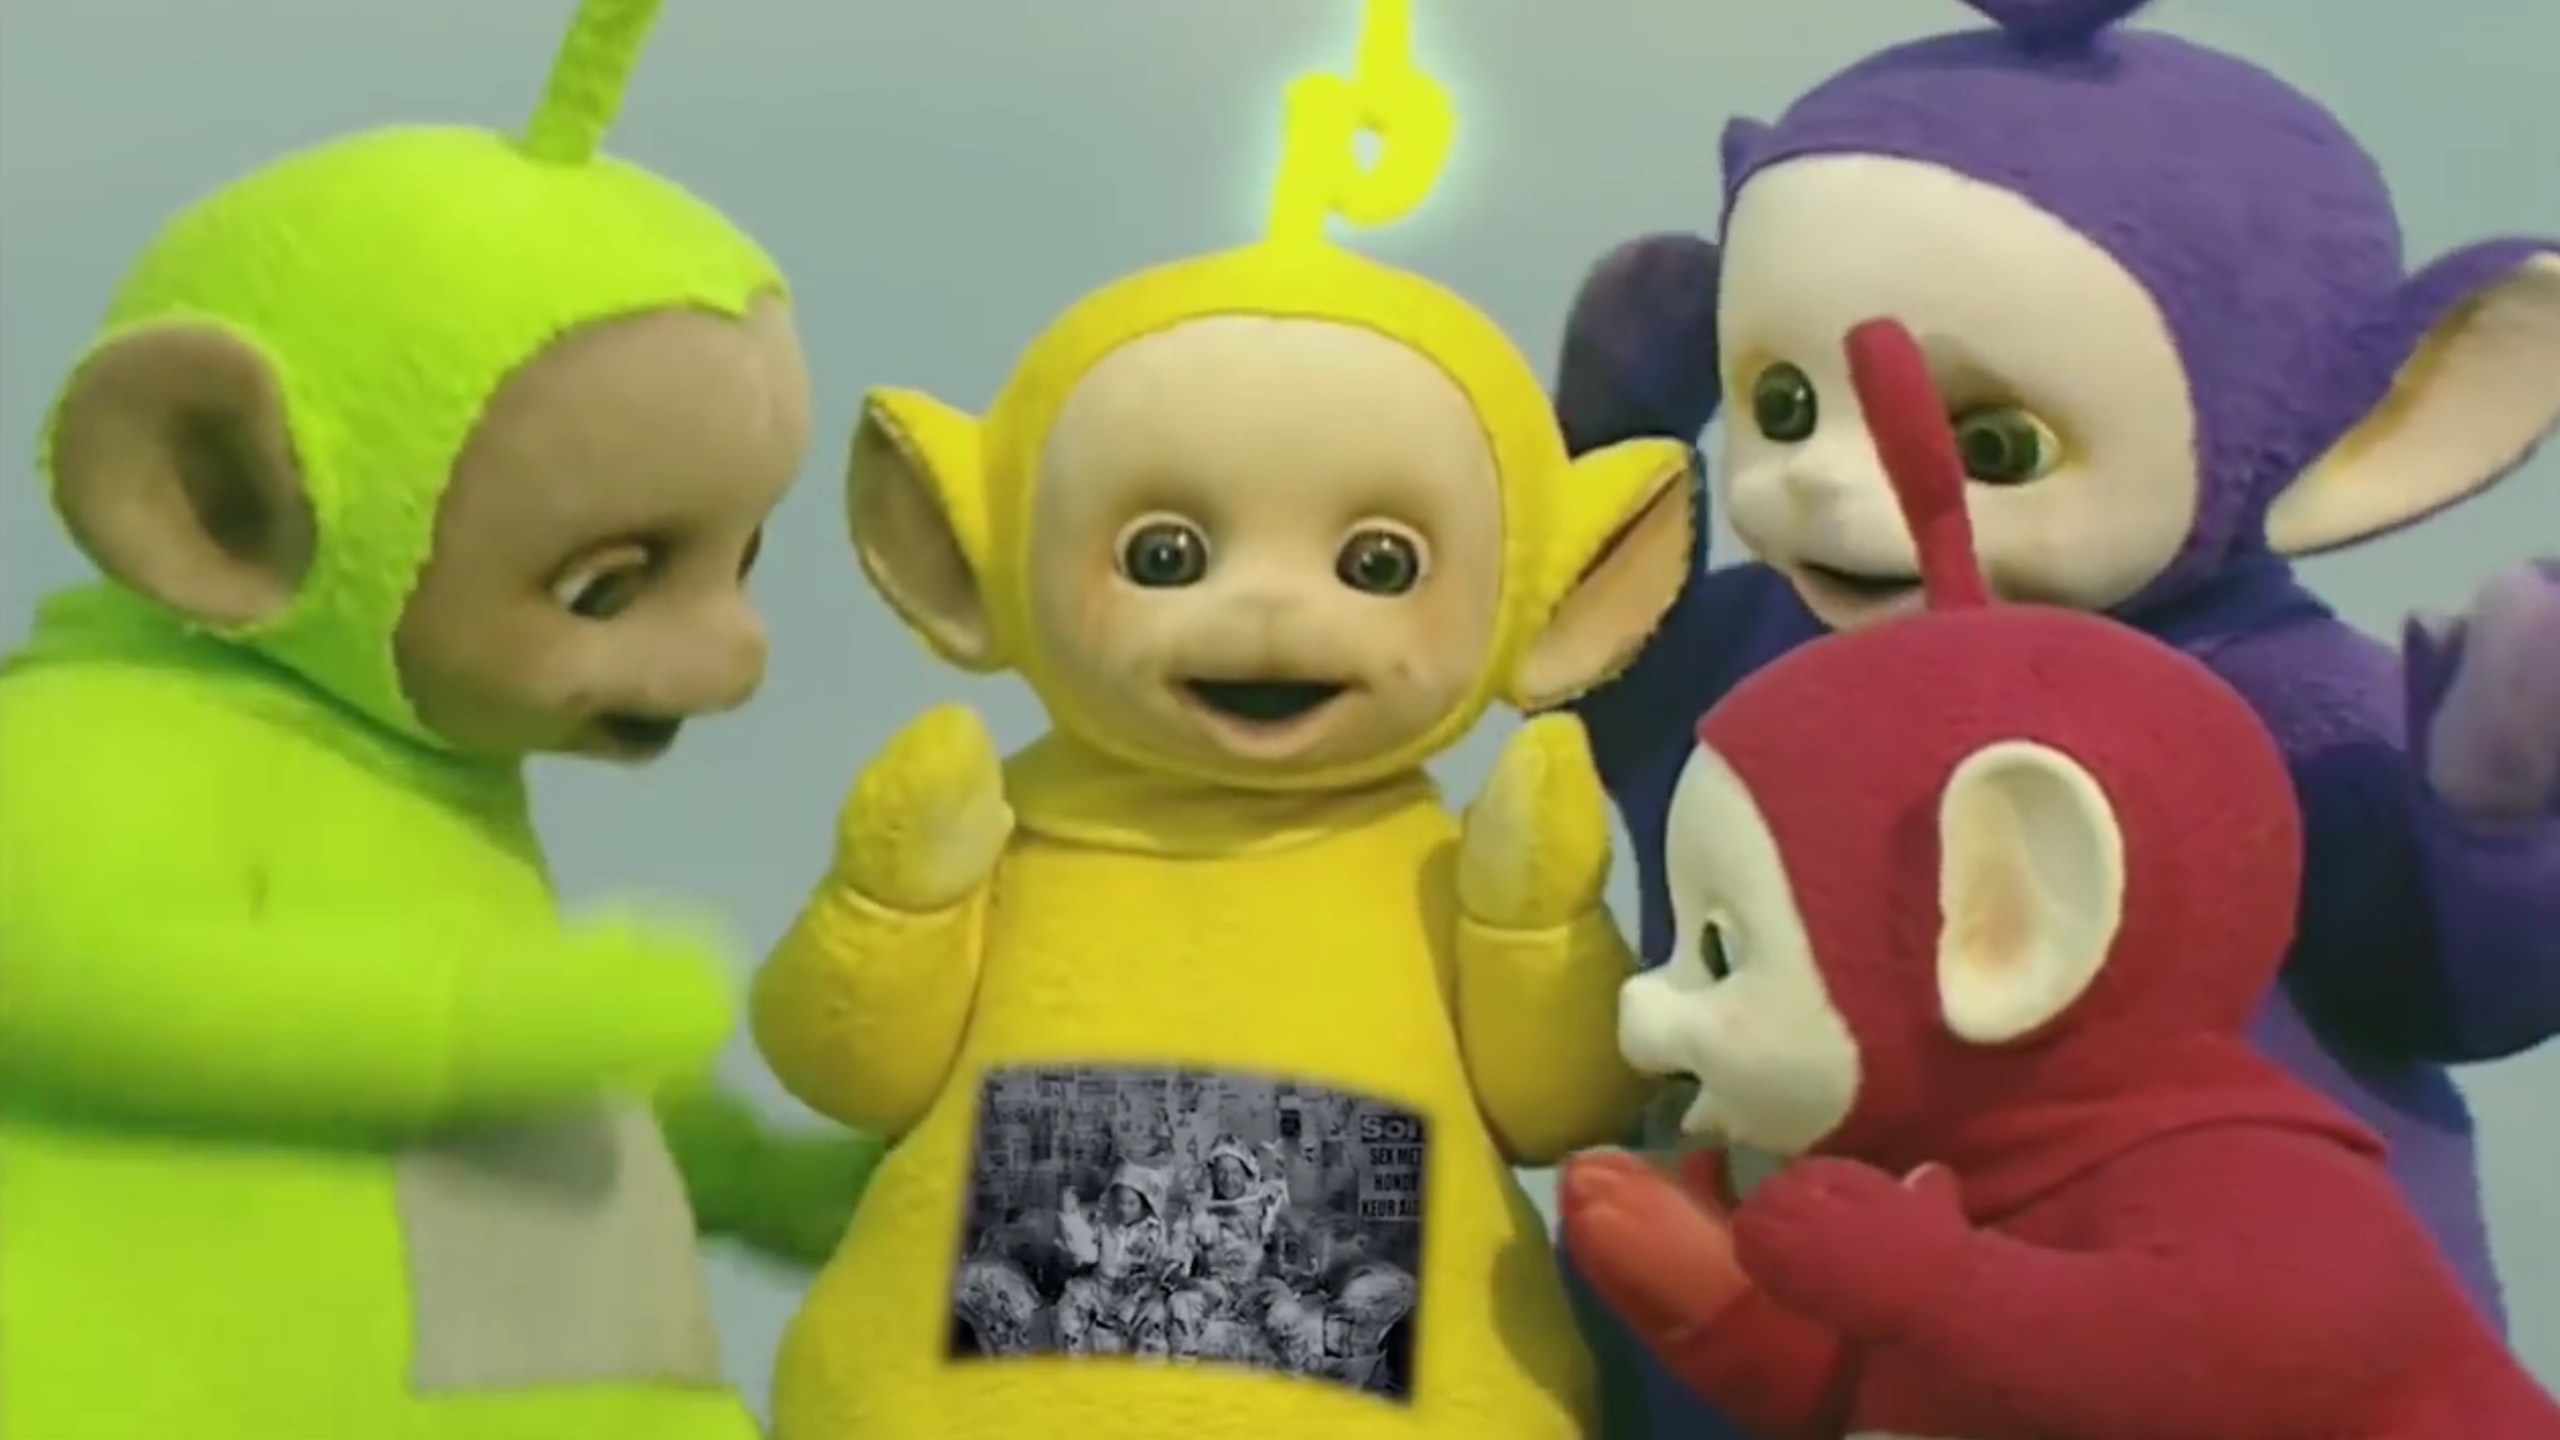 This Die Antwoord & 'Teletubbies' Mashup Is Freaky As Hell - Music Feeds